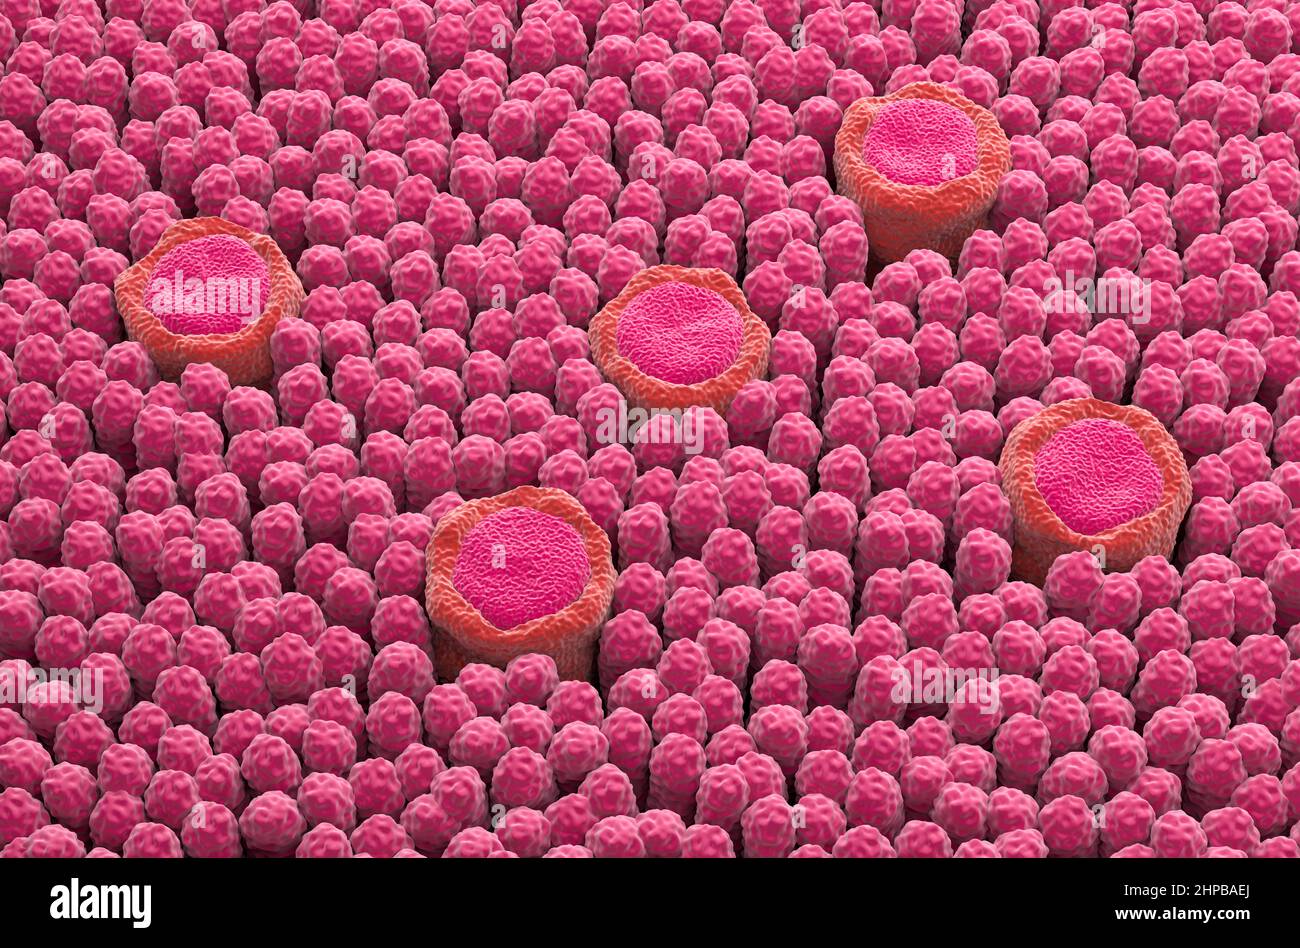 Taste bud receptor fields on the tongue - isometric view 3d illustration Stock Photo